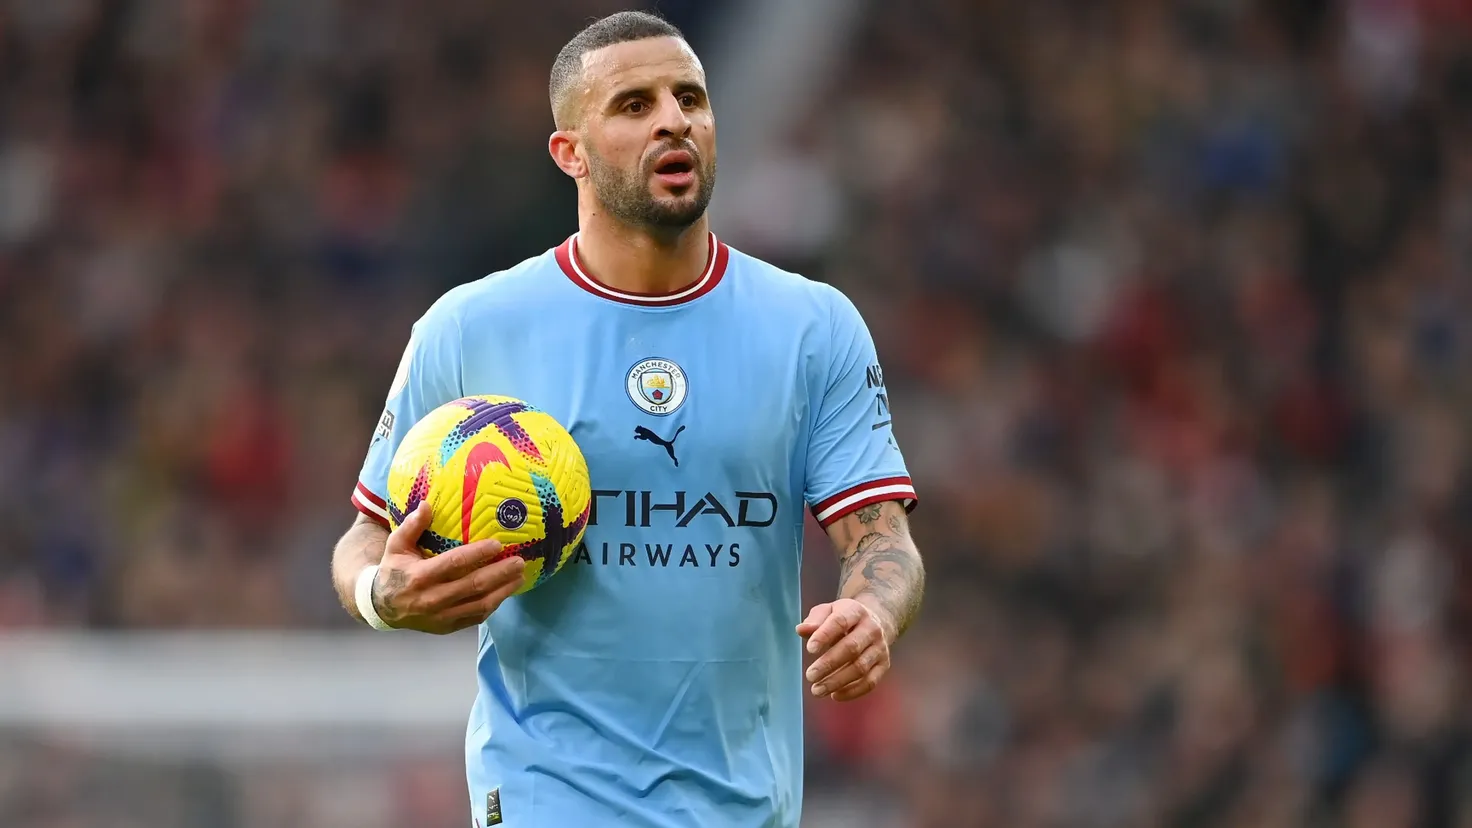 Kyle Walker's wife can't handle his scandals anymore: she leaves him after two years of marriage
